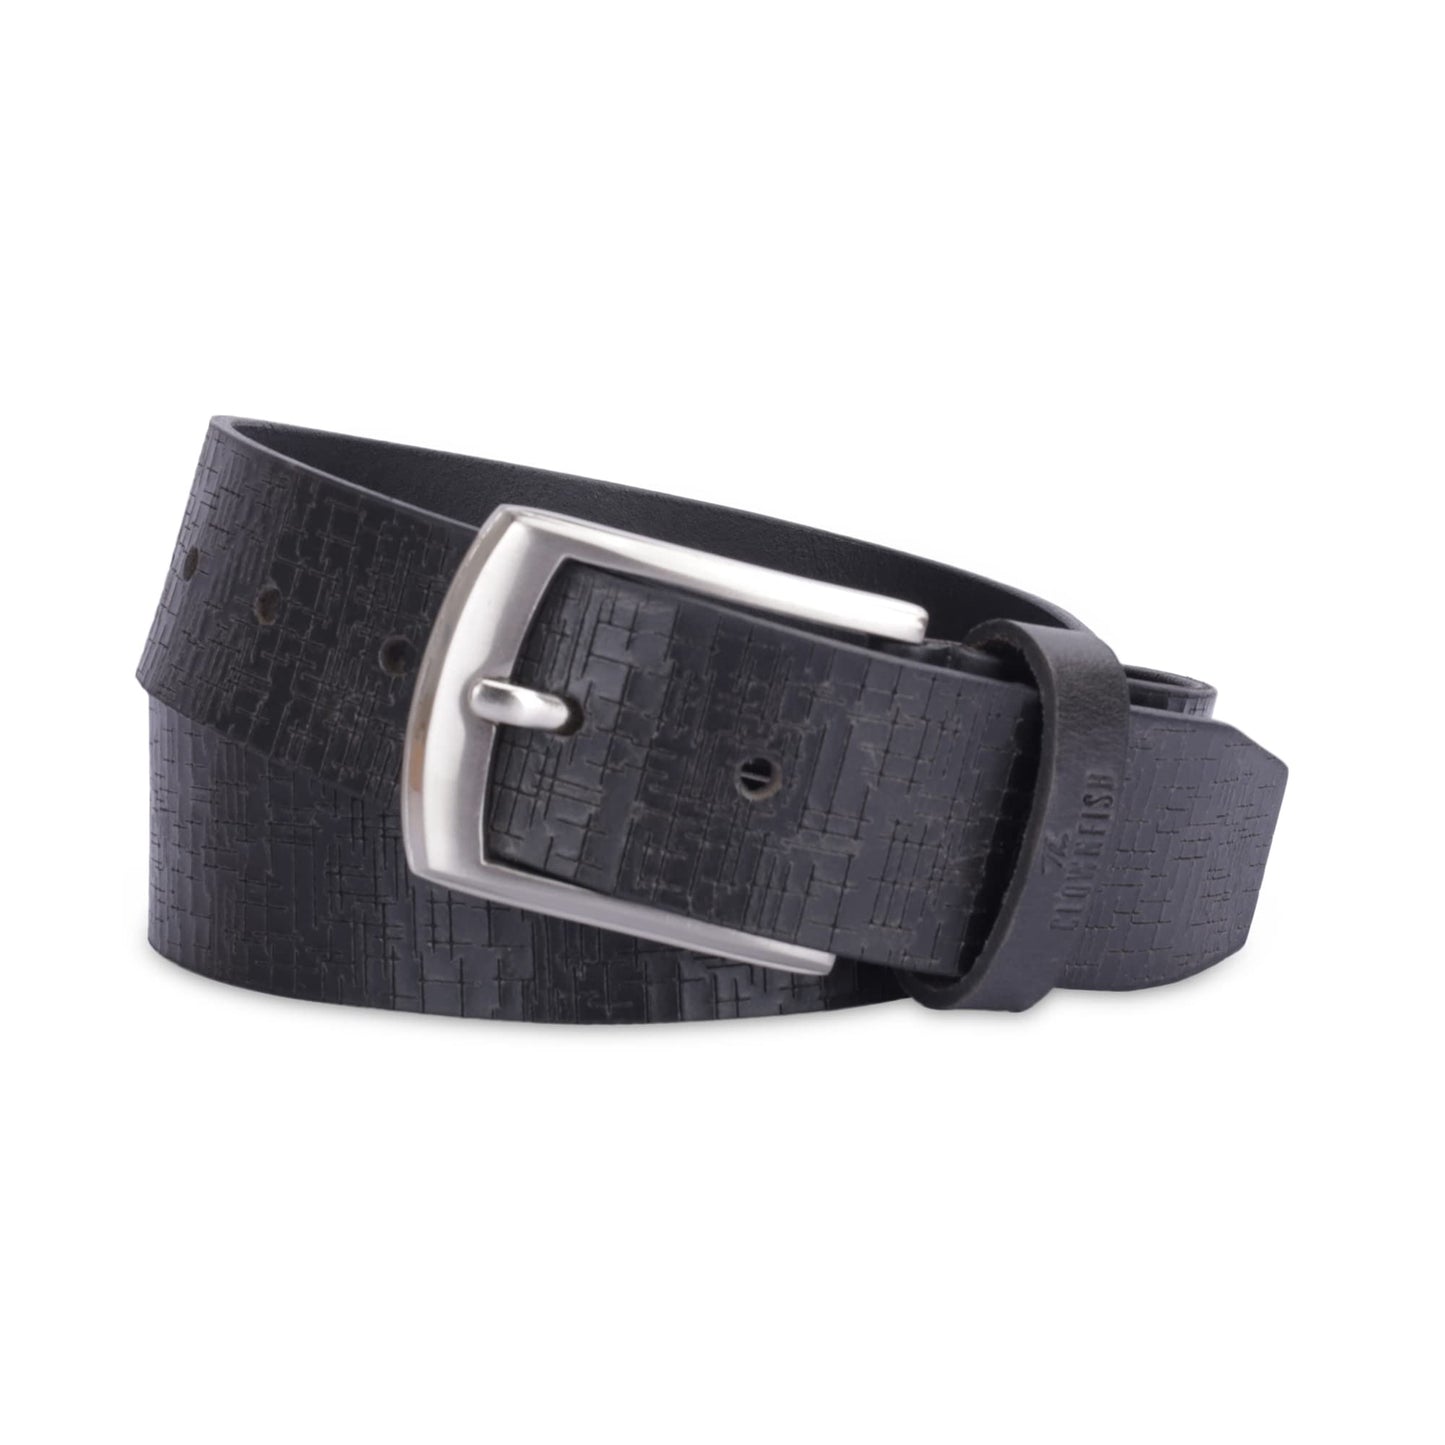 THE CLOWNFISH Men's Genuine Leather Belt with Textured Design- Black (Size-40 inches)